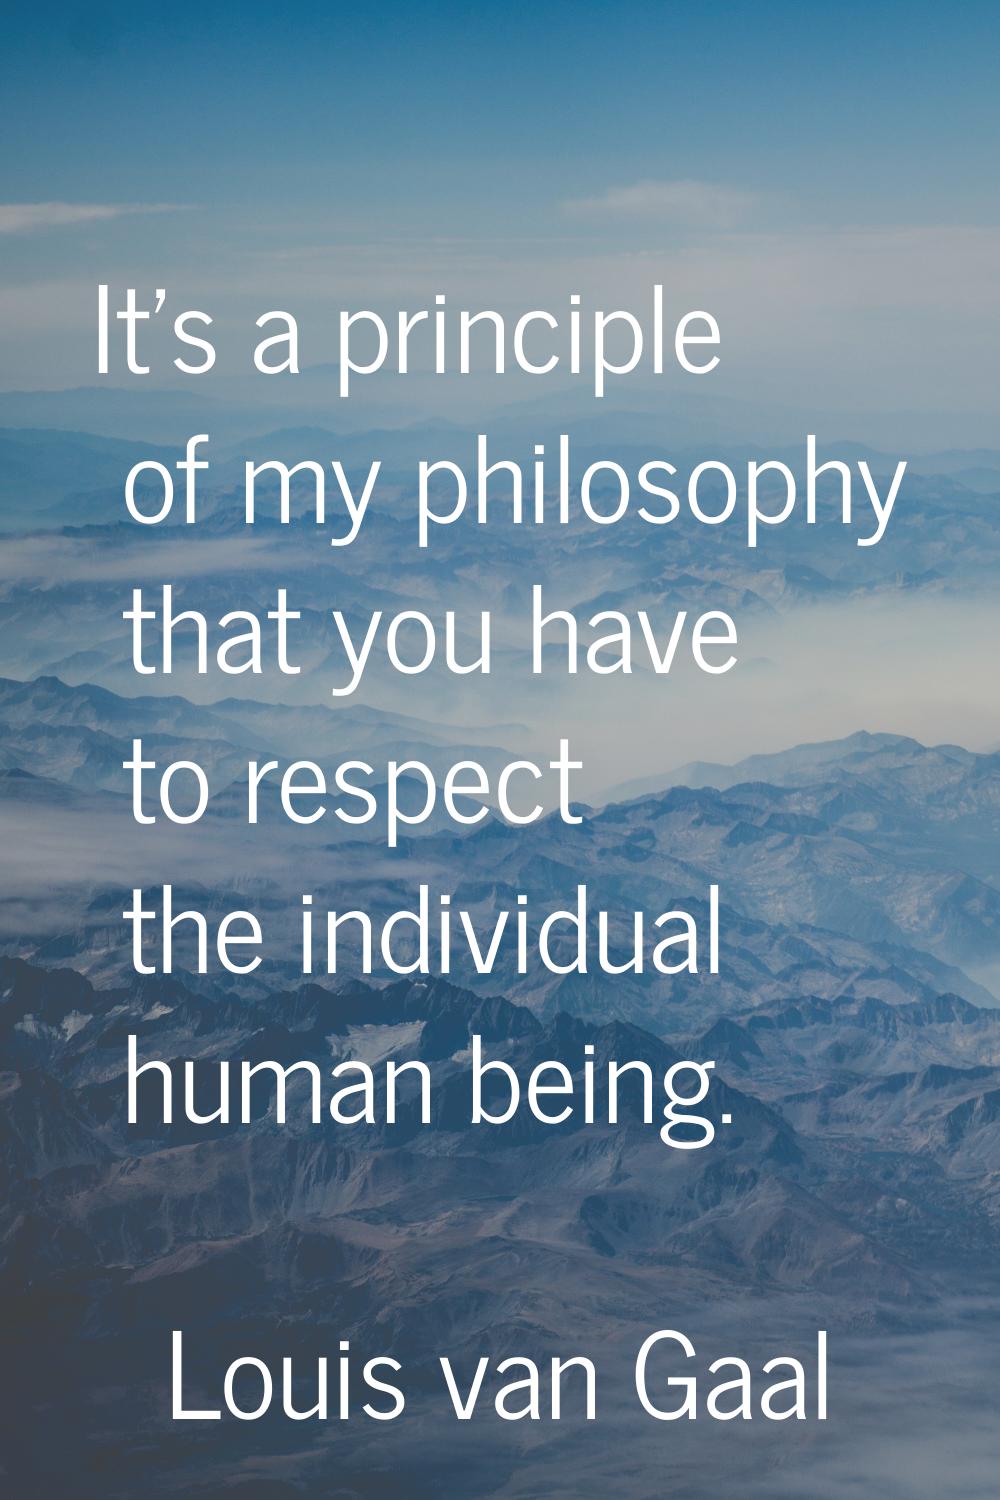 It's a principle of my philosophy that you have to respect the individual human being.